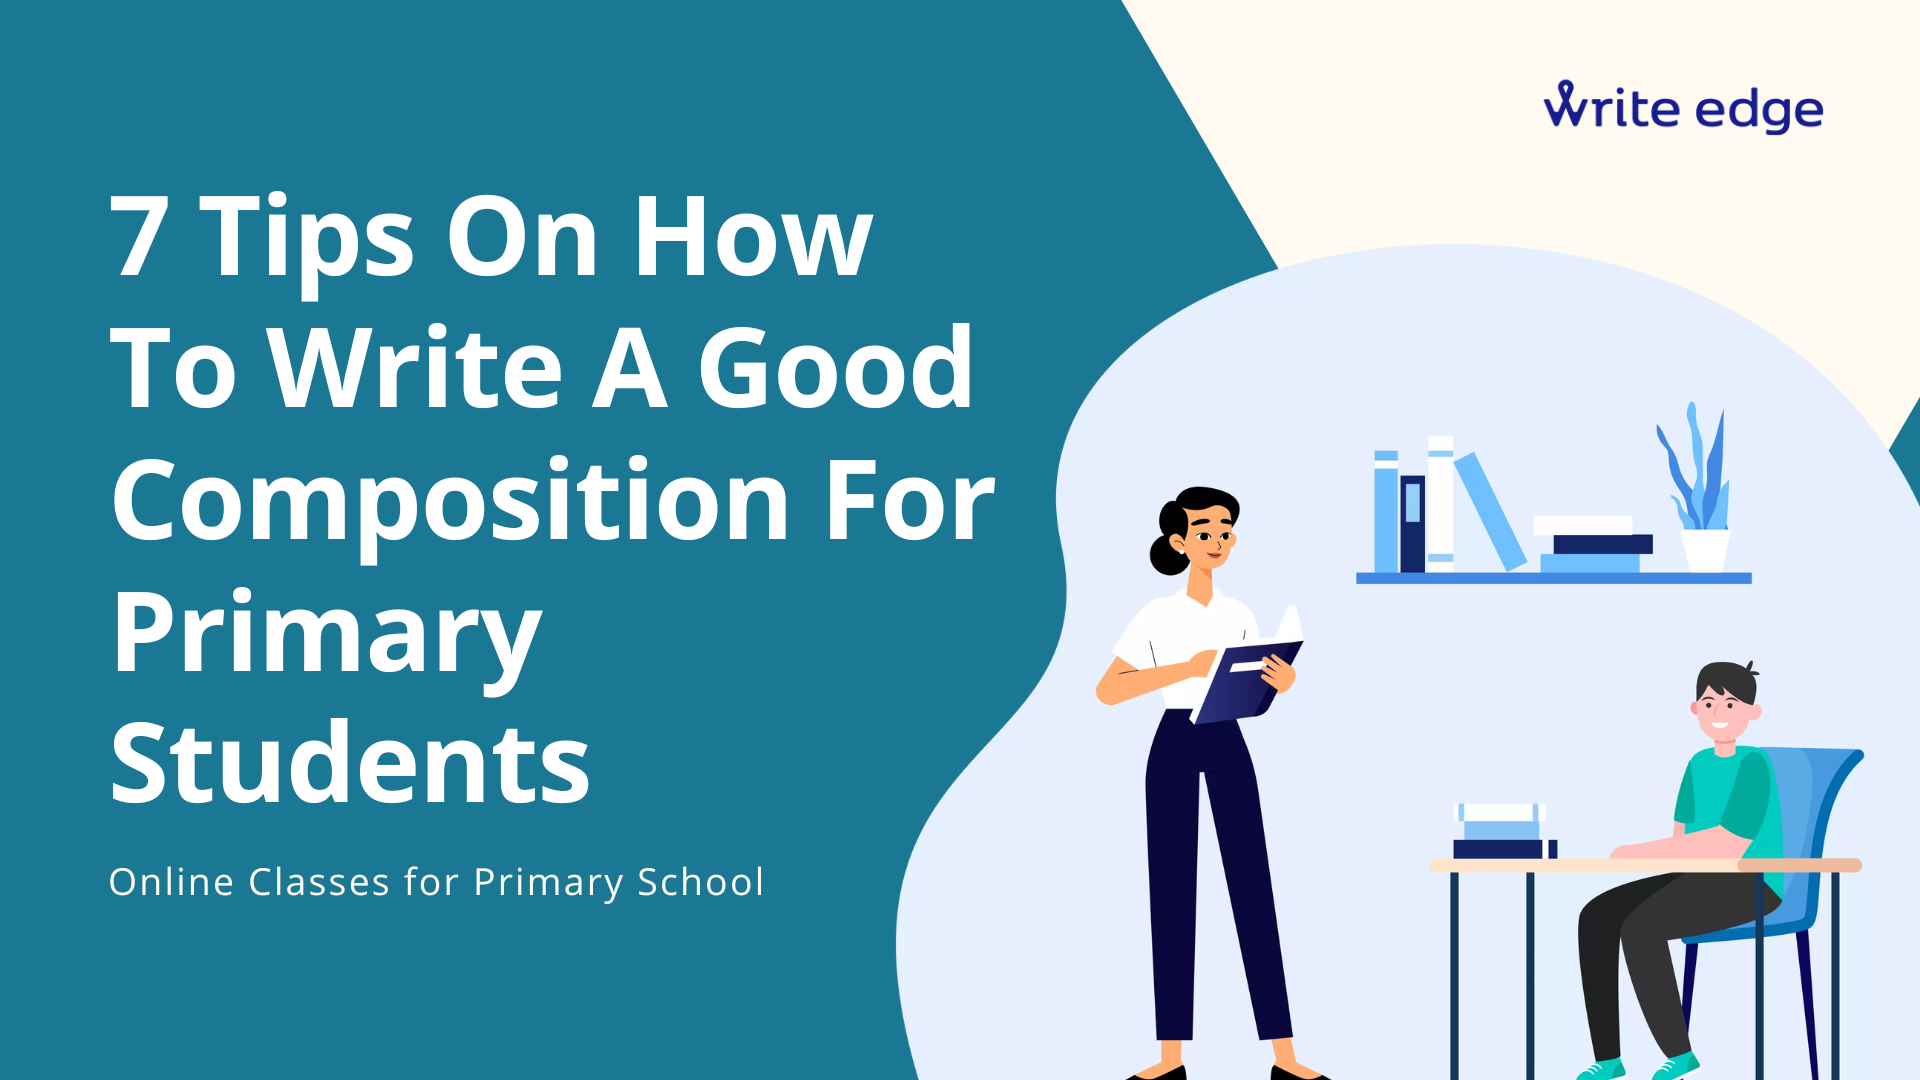 7 Tips On How To Write A Good Composition For Primary Students